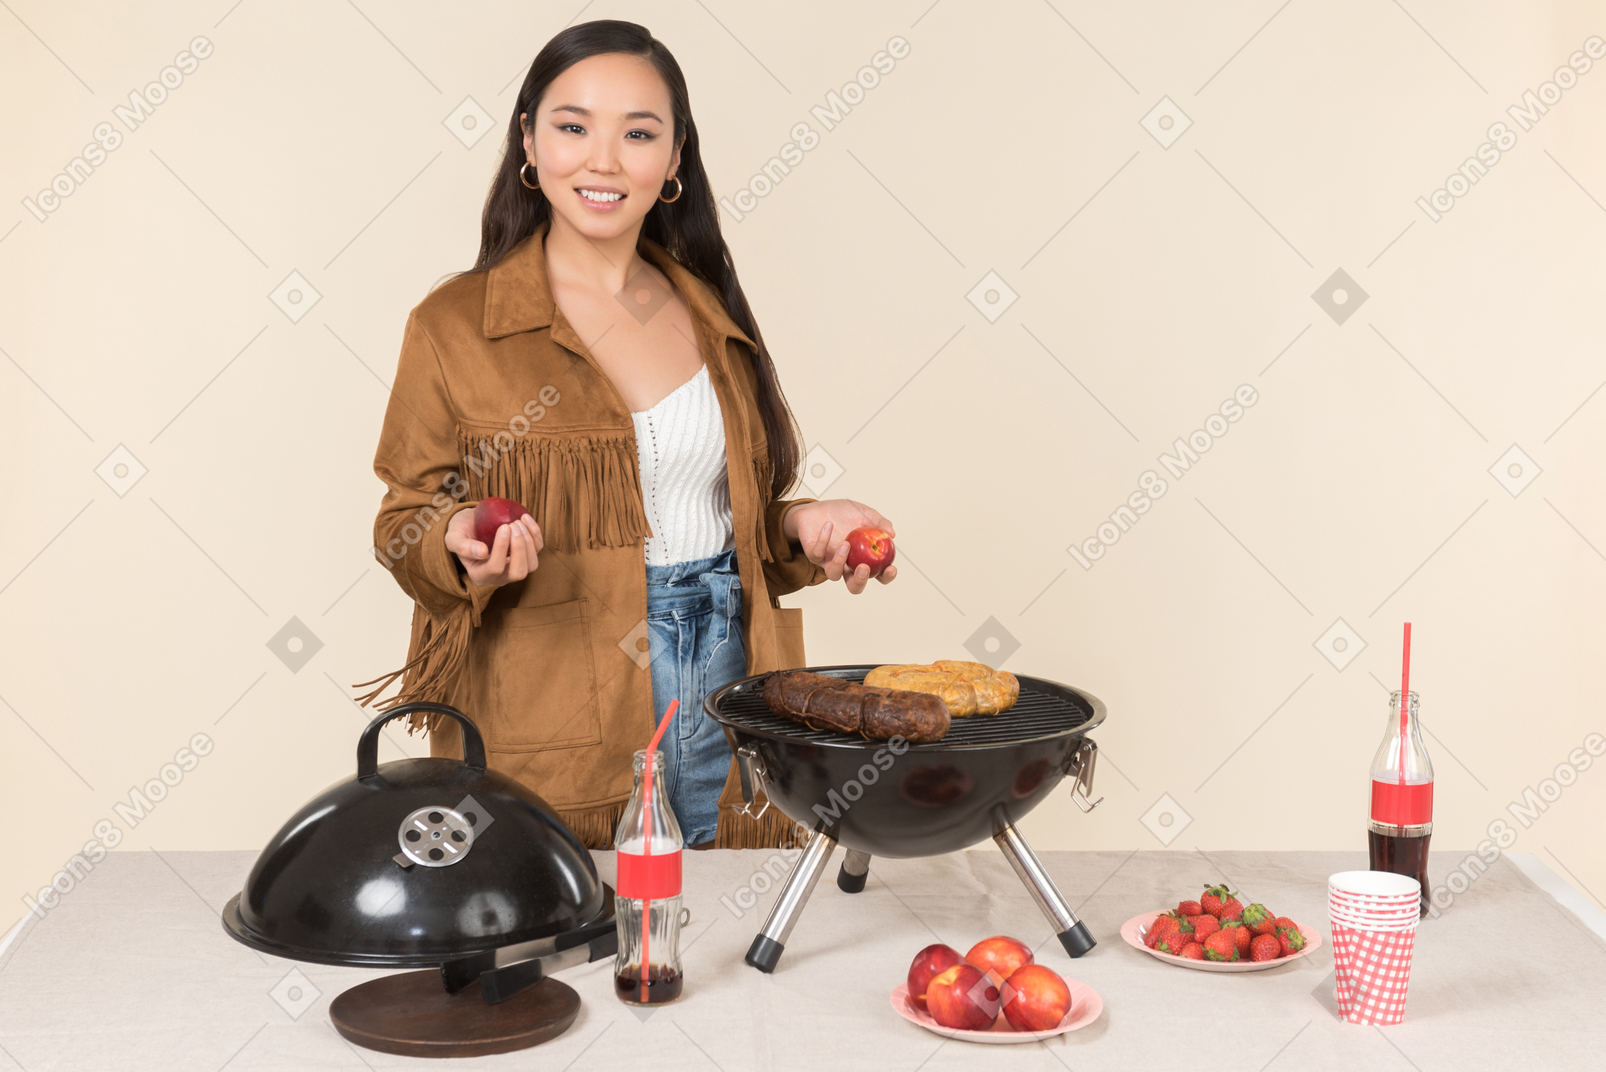 Young asian woman standing near the table with grill on it